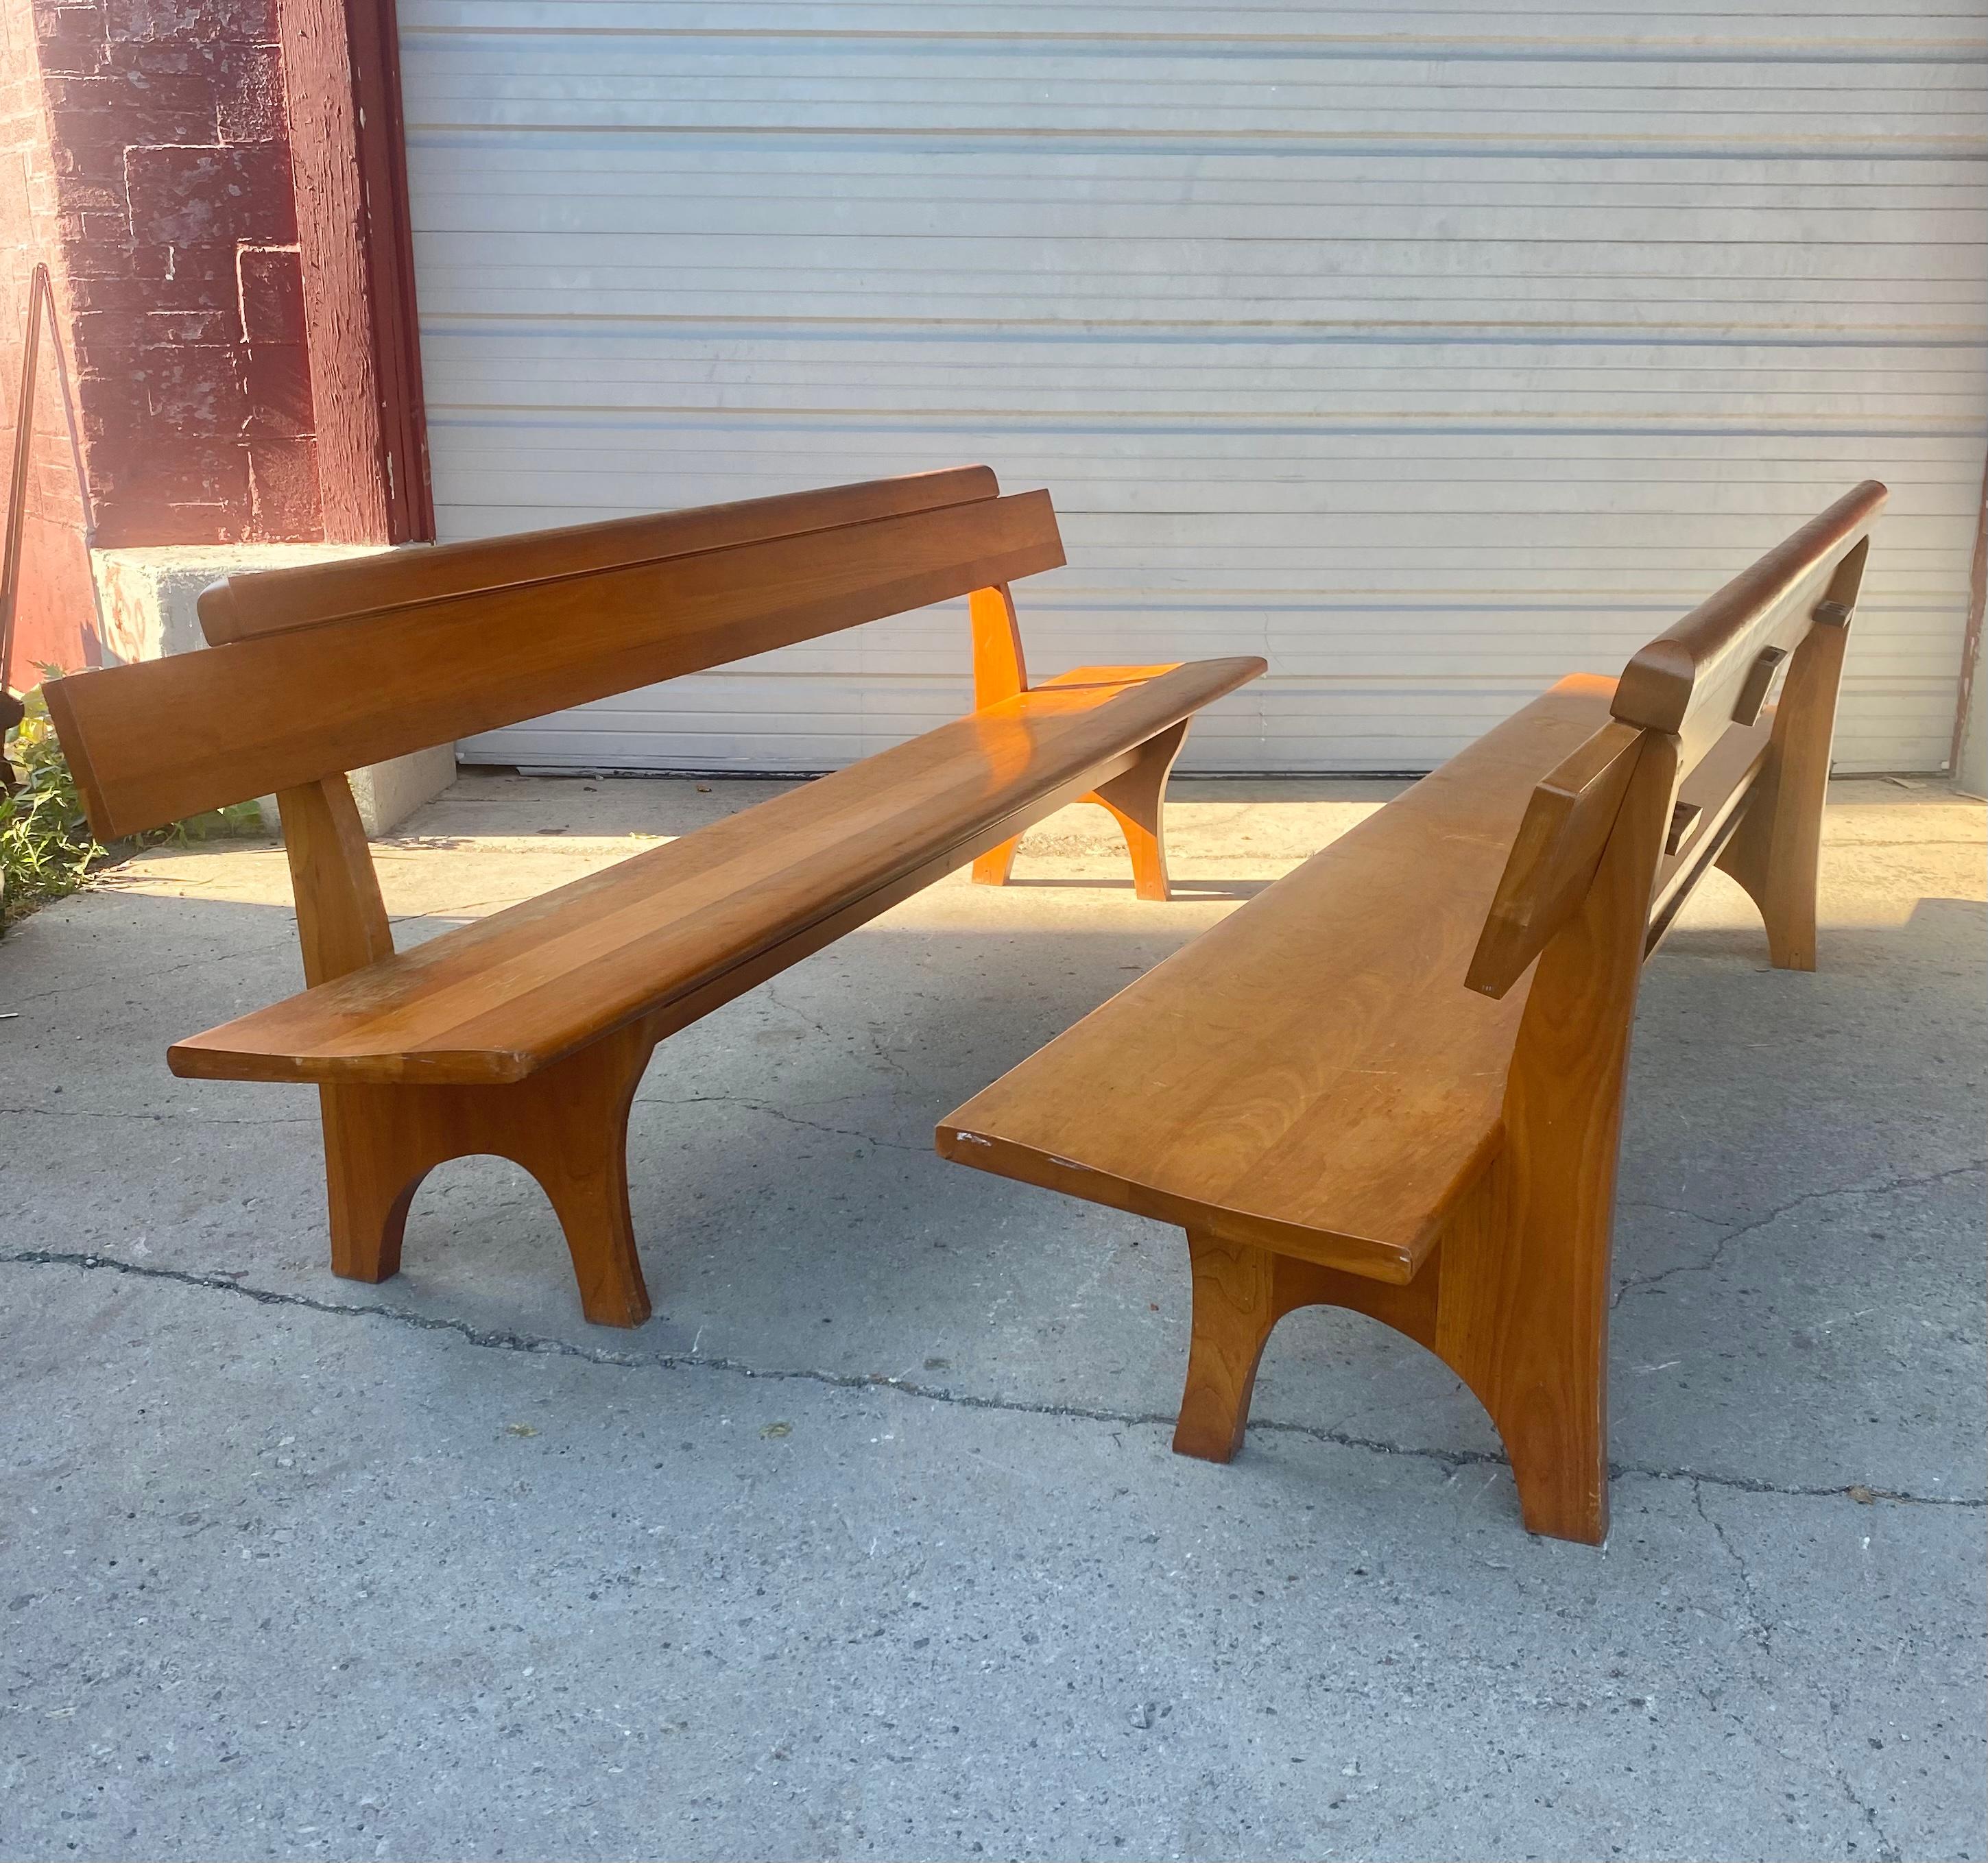 Stunning solid birch Modernist Church Pew / Bench, in the manner of Frank Lloyd Wright, Usonian, Purchased out of architectural designed modernist church in Buffalo NY in the mid 1950s, Superior quality and construction, Beautifully sculpted birch